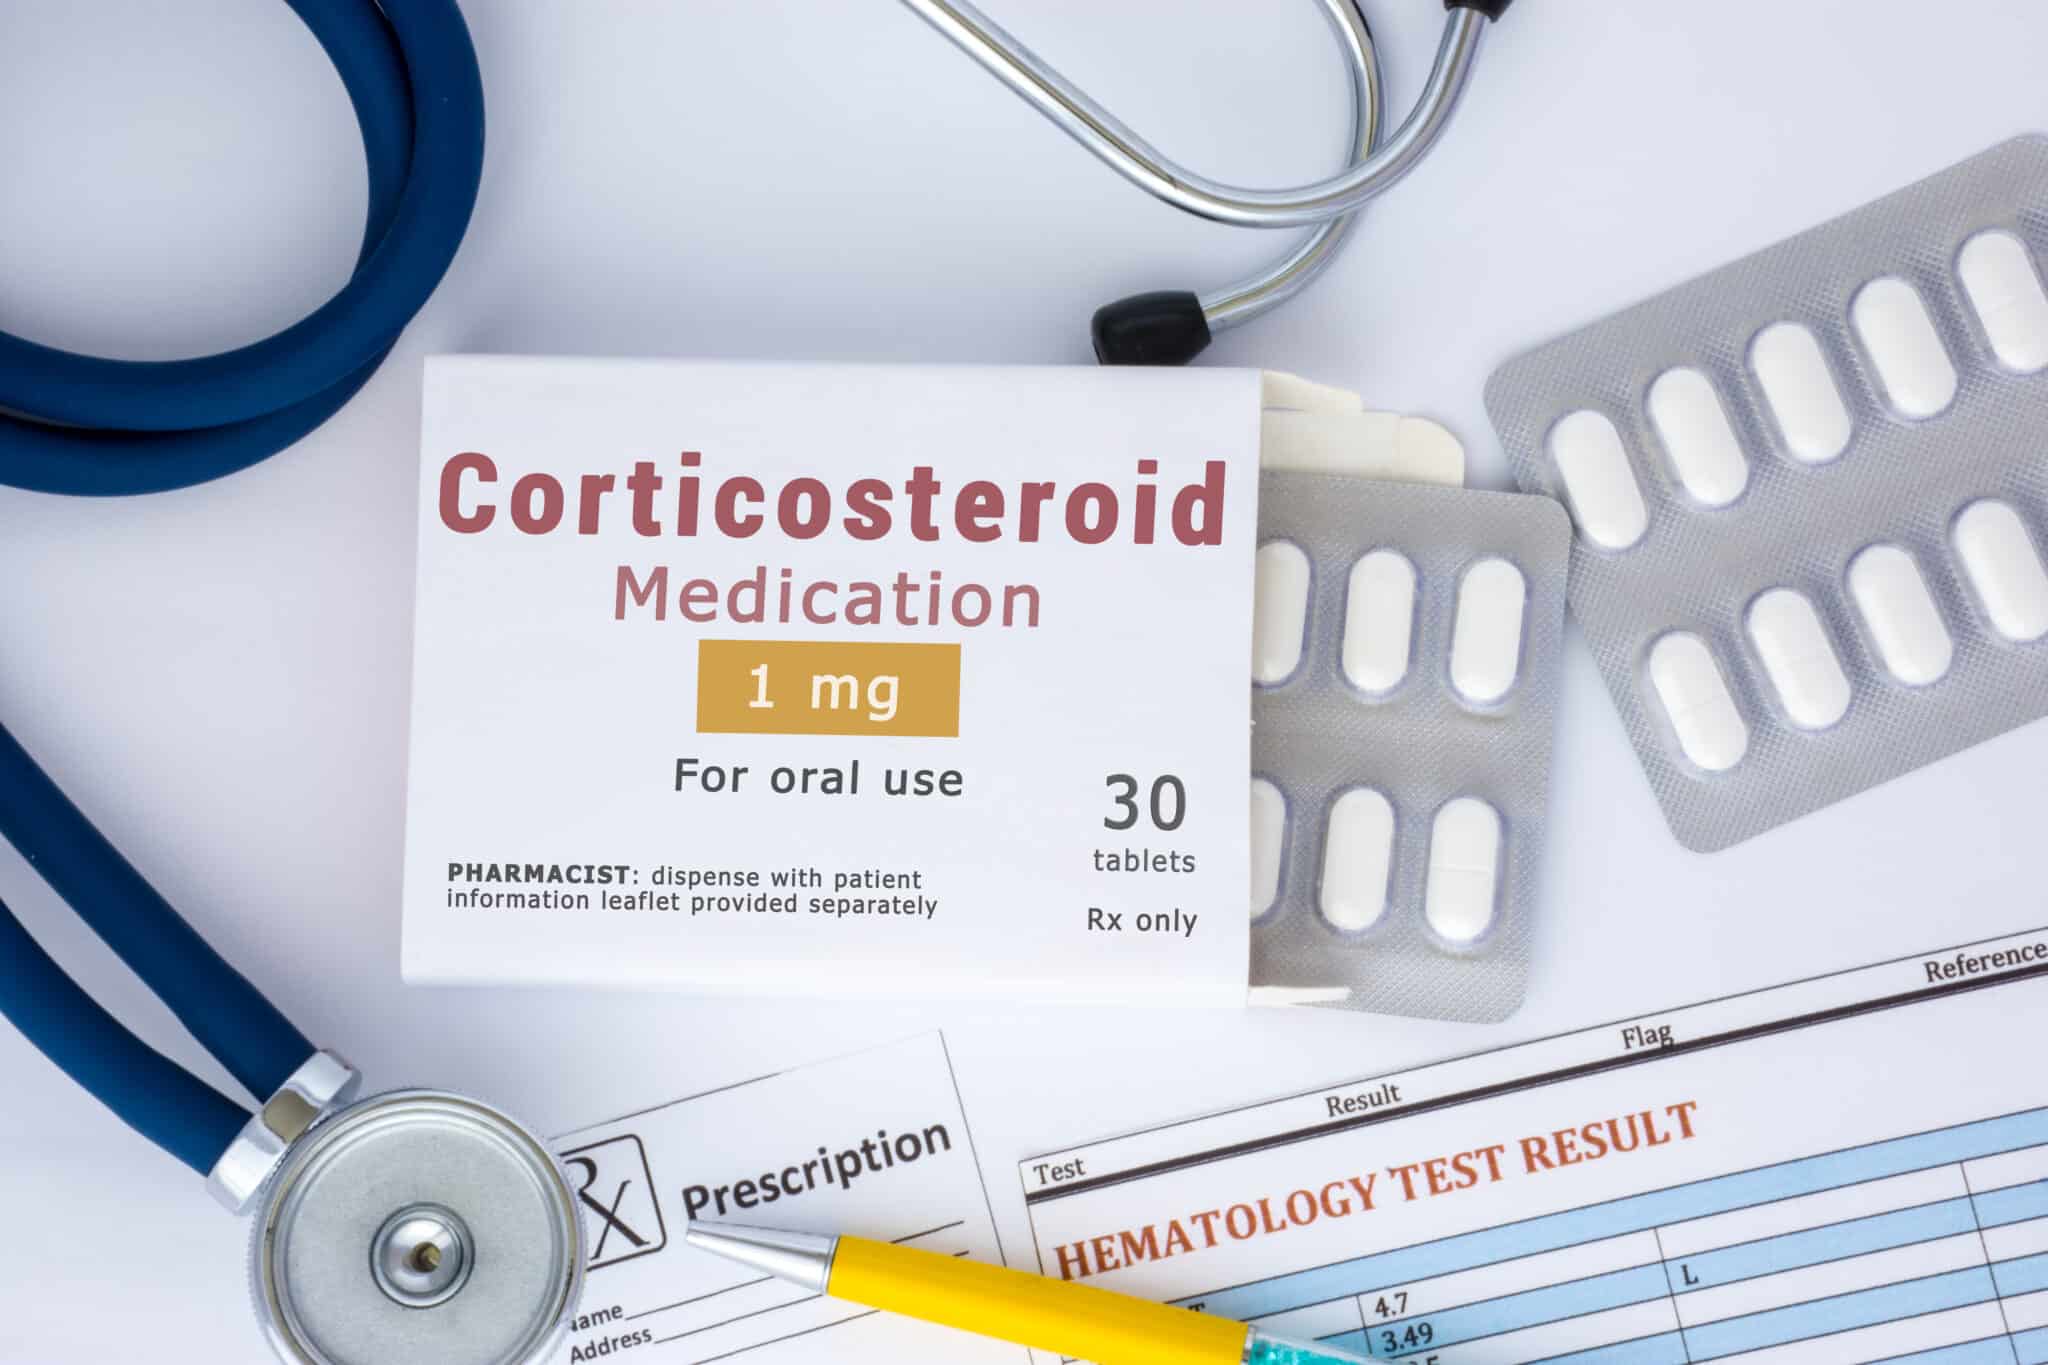 Corticosteroid Medication for oral use